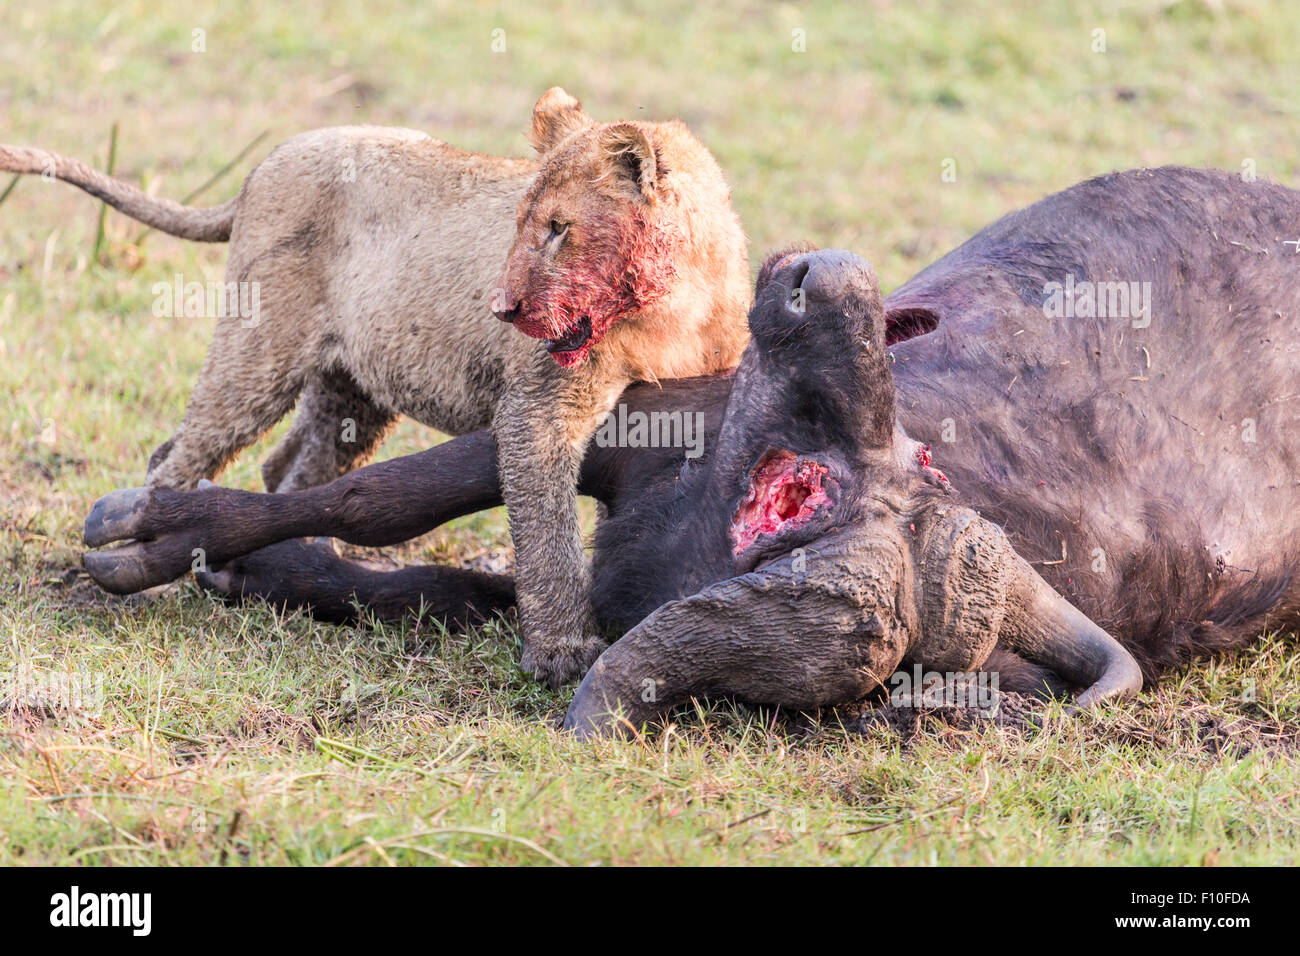 Bloodied lioness, Panthera leo, blood on face, feasting on her prey, a recently killed Cape Buffalo, Syncerus caffer, Okavango Delta, north Botswana Stock Photo